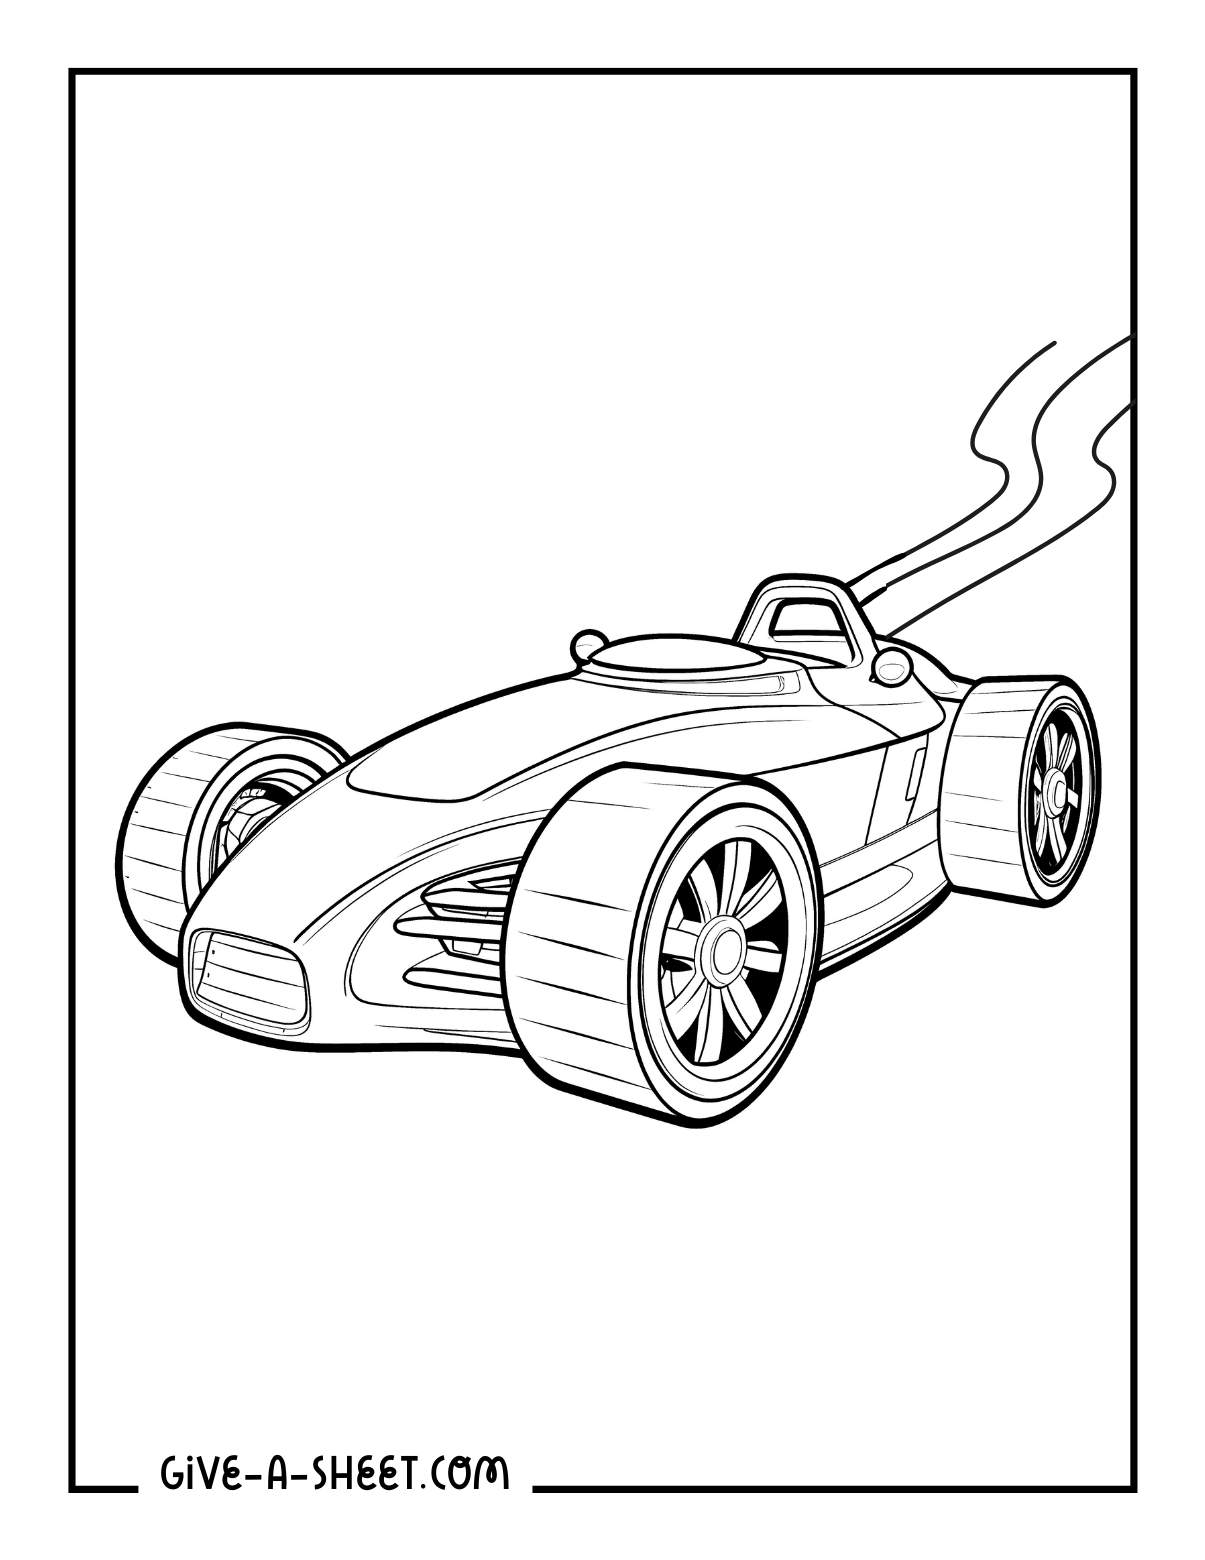 Futuristic race car coloring page for kids.